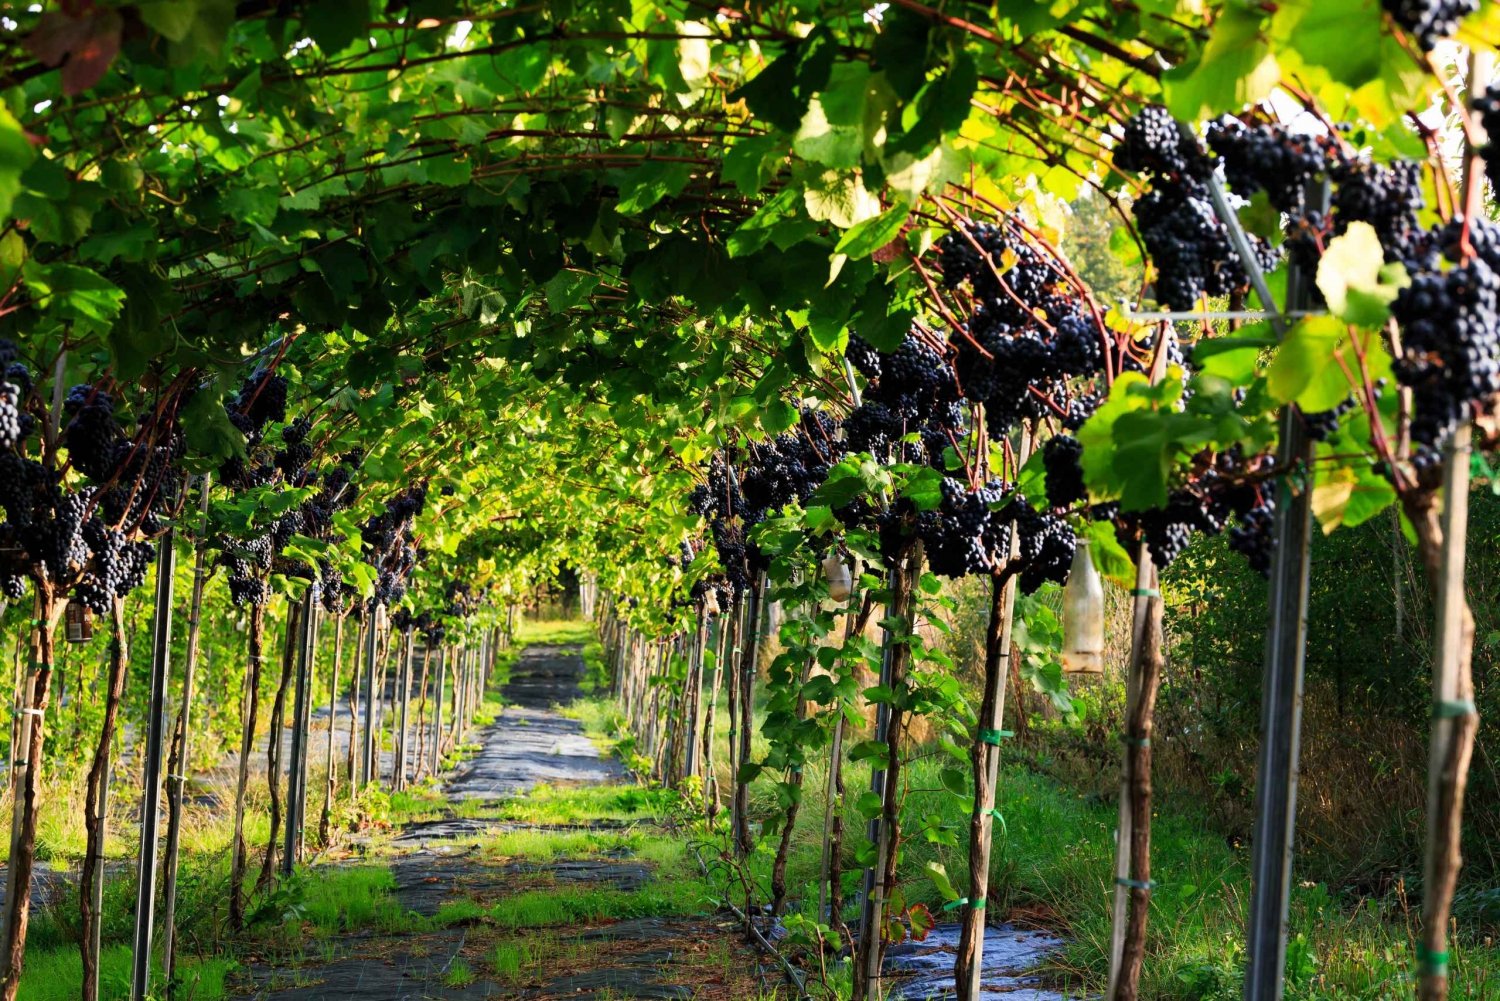 Outer Copenhagen: Guided Vineyard Tour with Wine Tastings